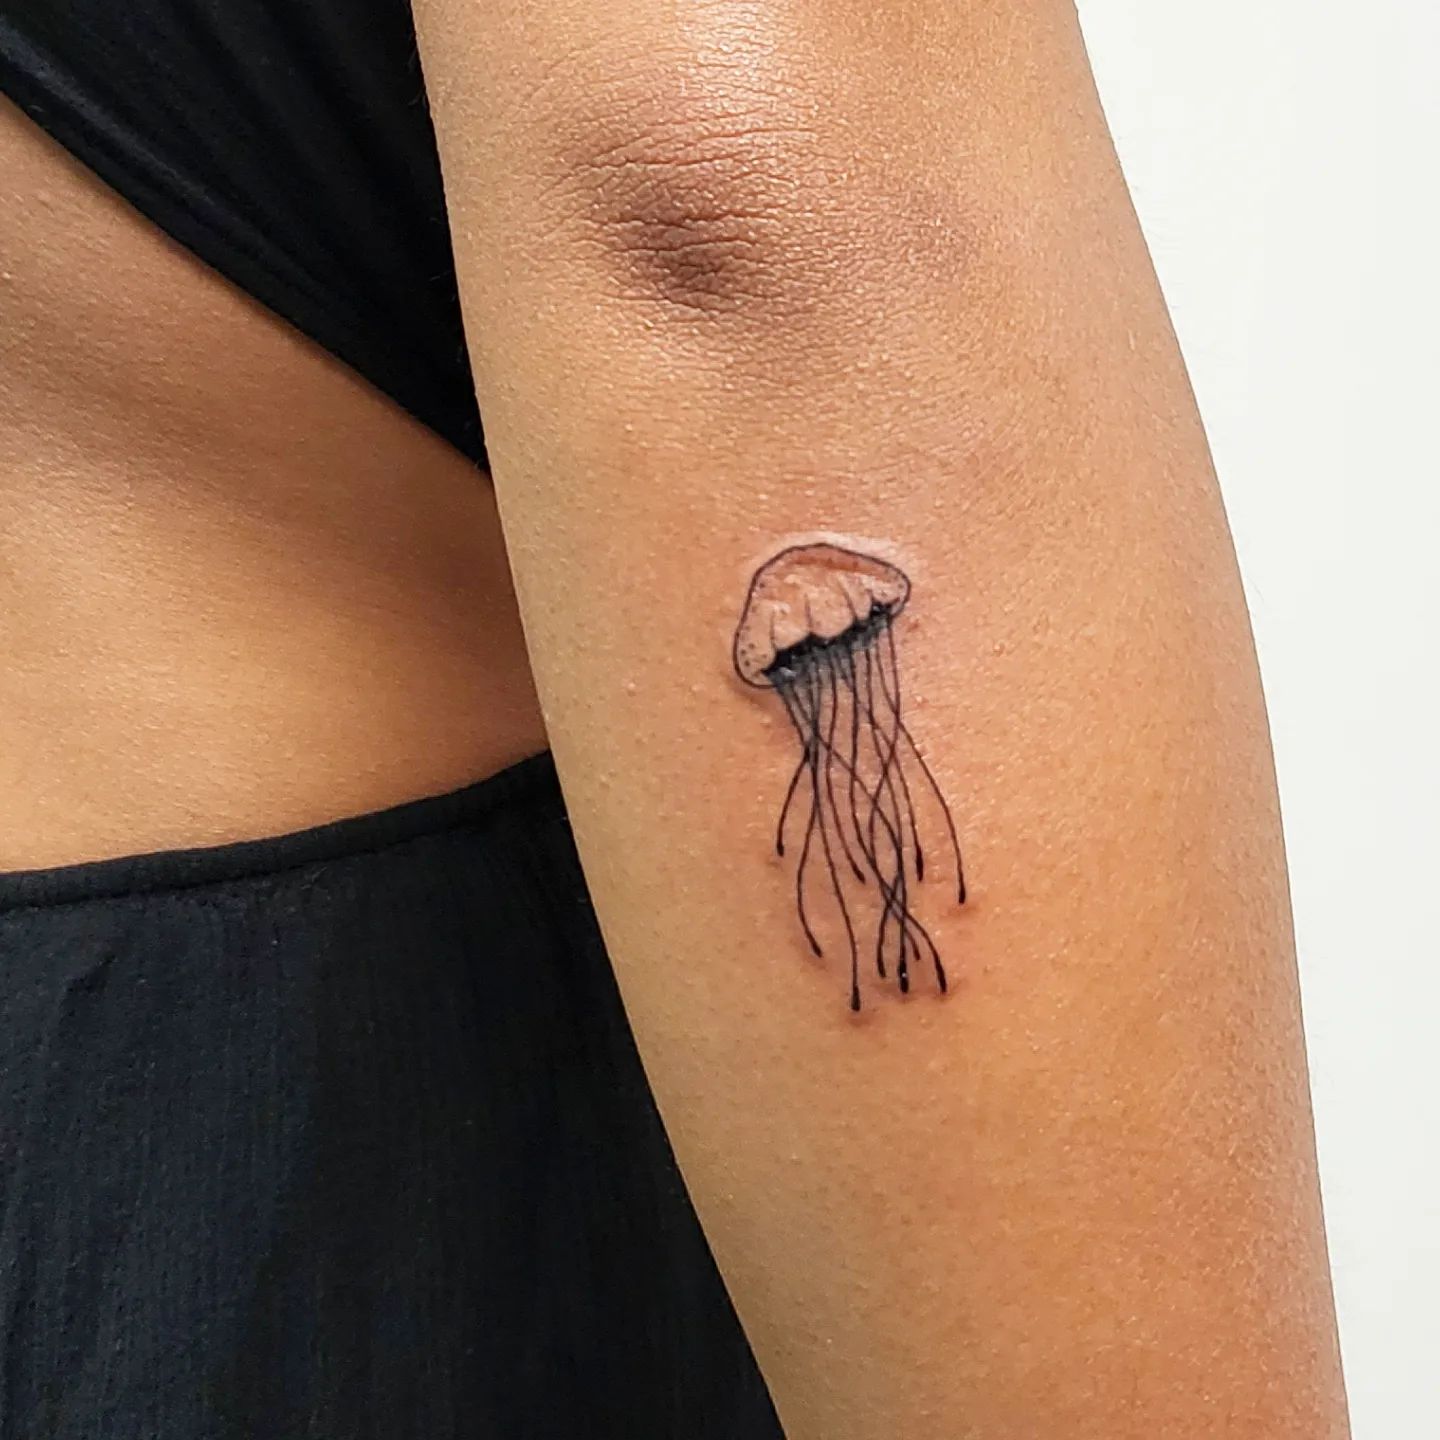 50 Dope Jellyfish Tattoo Ideas With Meanings Explained  InkMatch